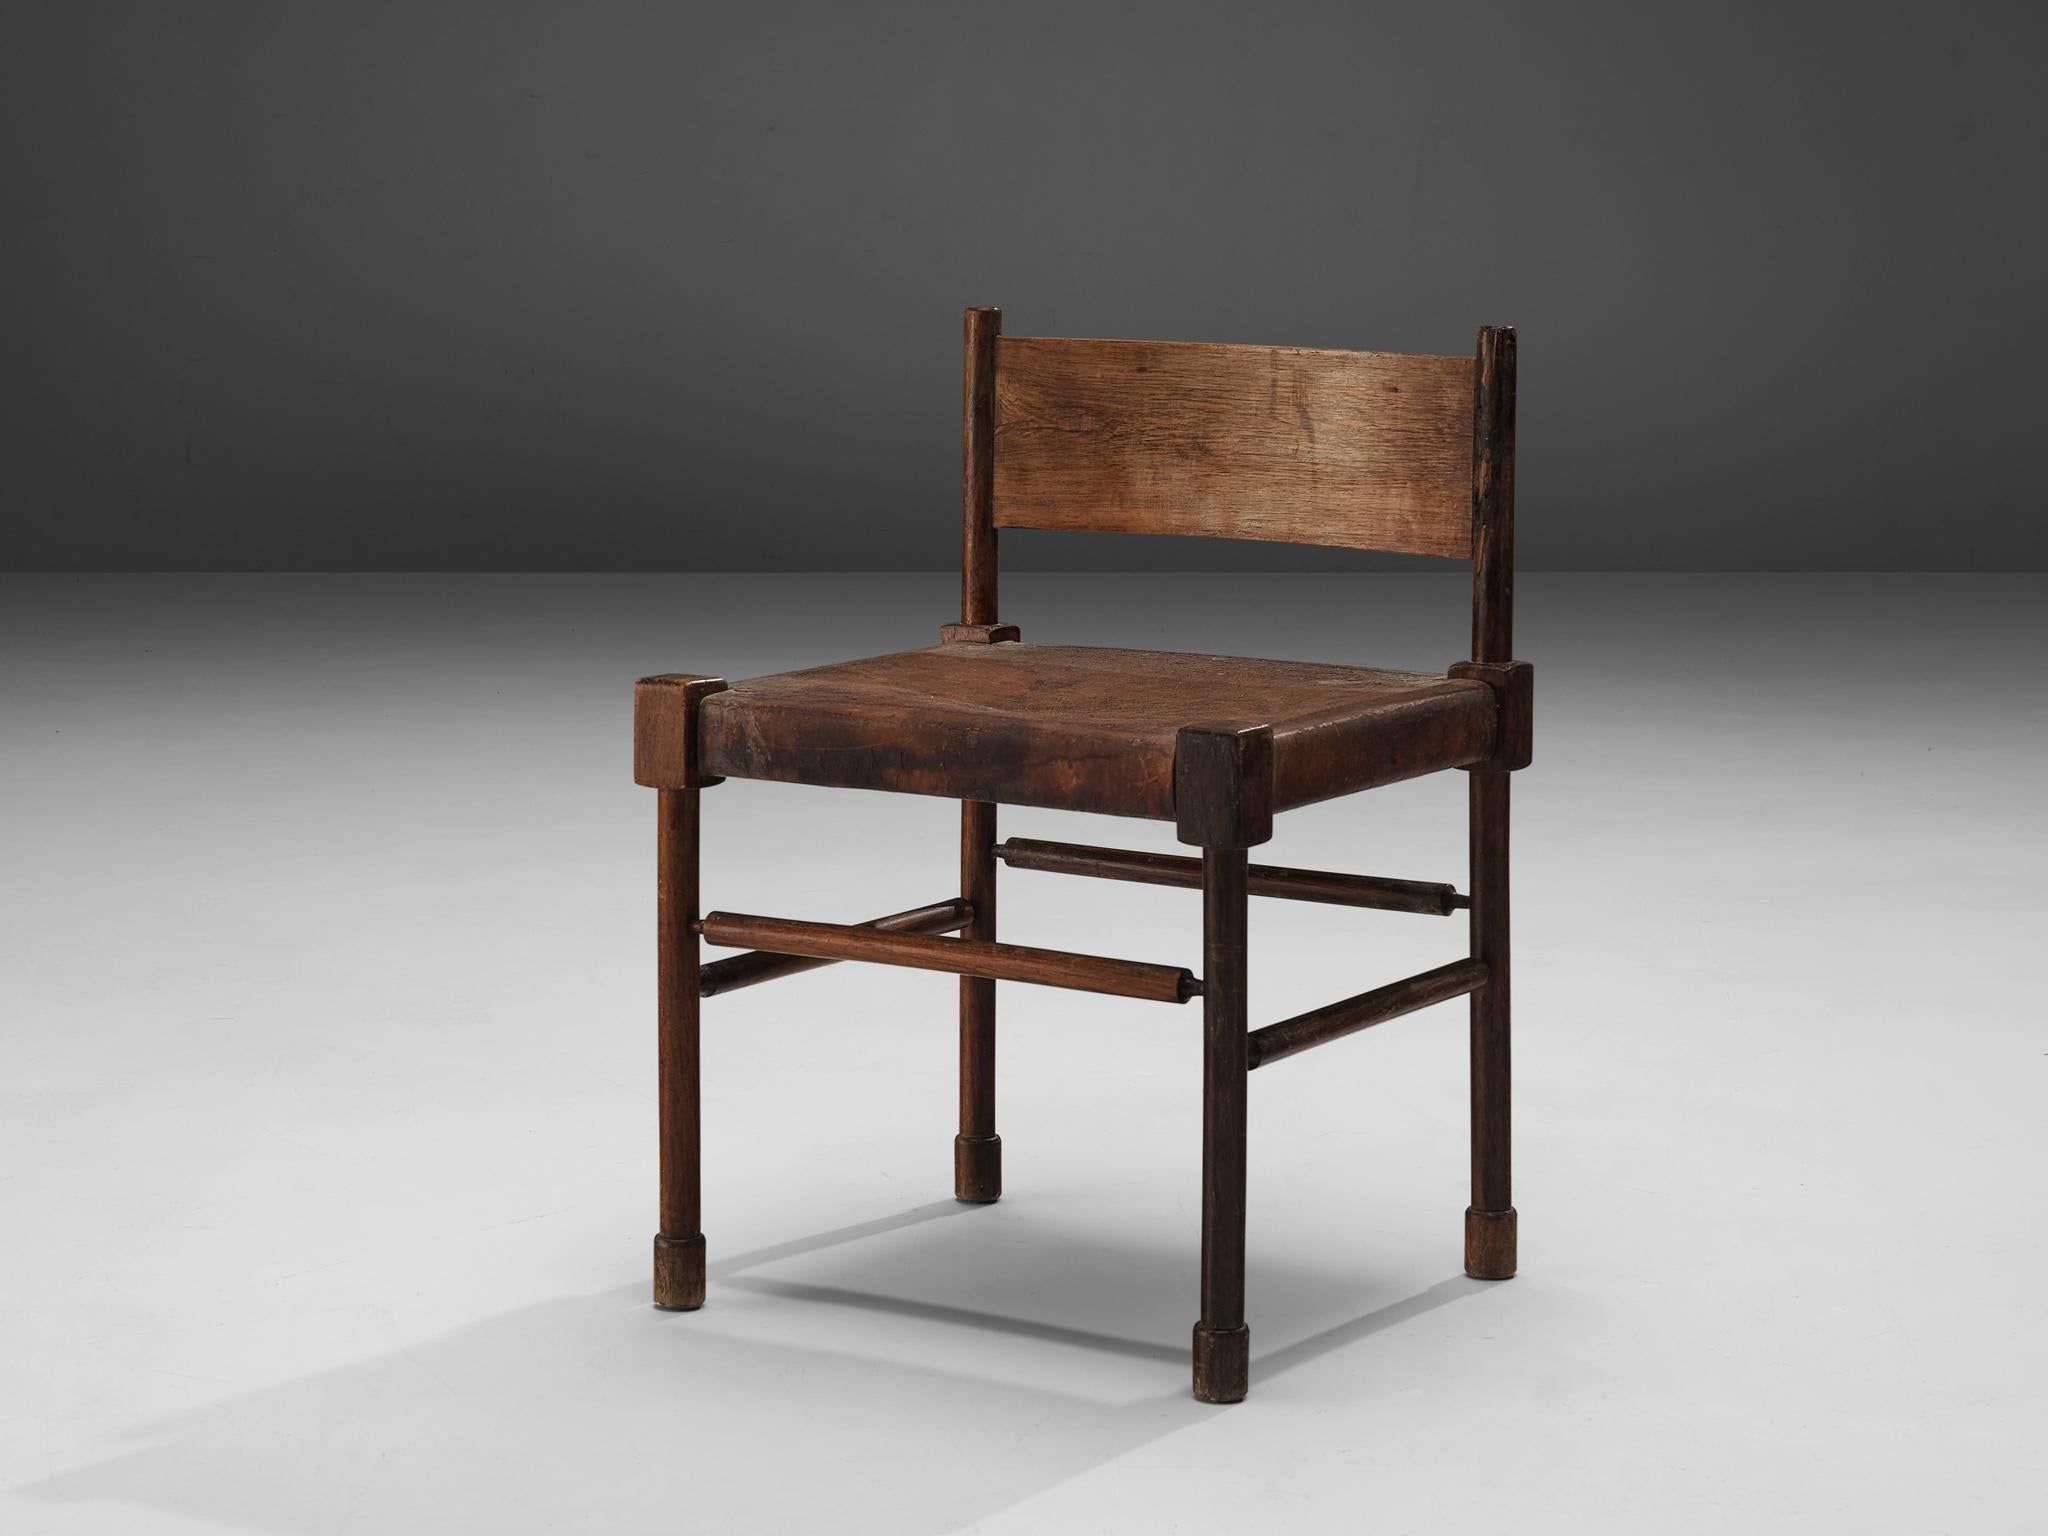 Side chair, stained wood, patinated leather, Brazil, 1940s

Rare side chair with sculpted frame in stained wood and leather seat. What makes this design so unique is the way the designer played with proportions and shapes. The detailed carved frame